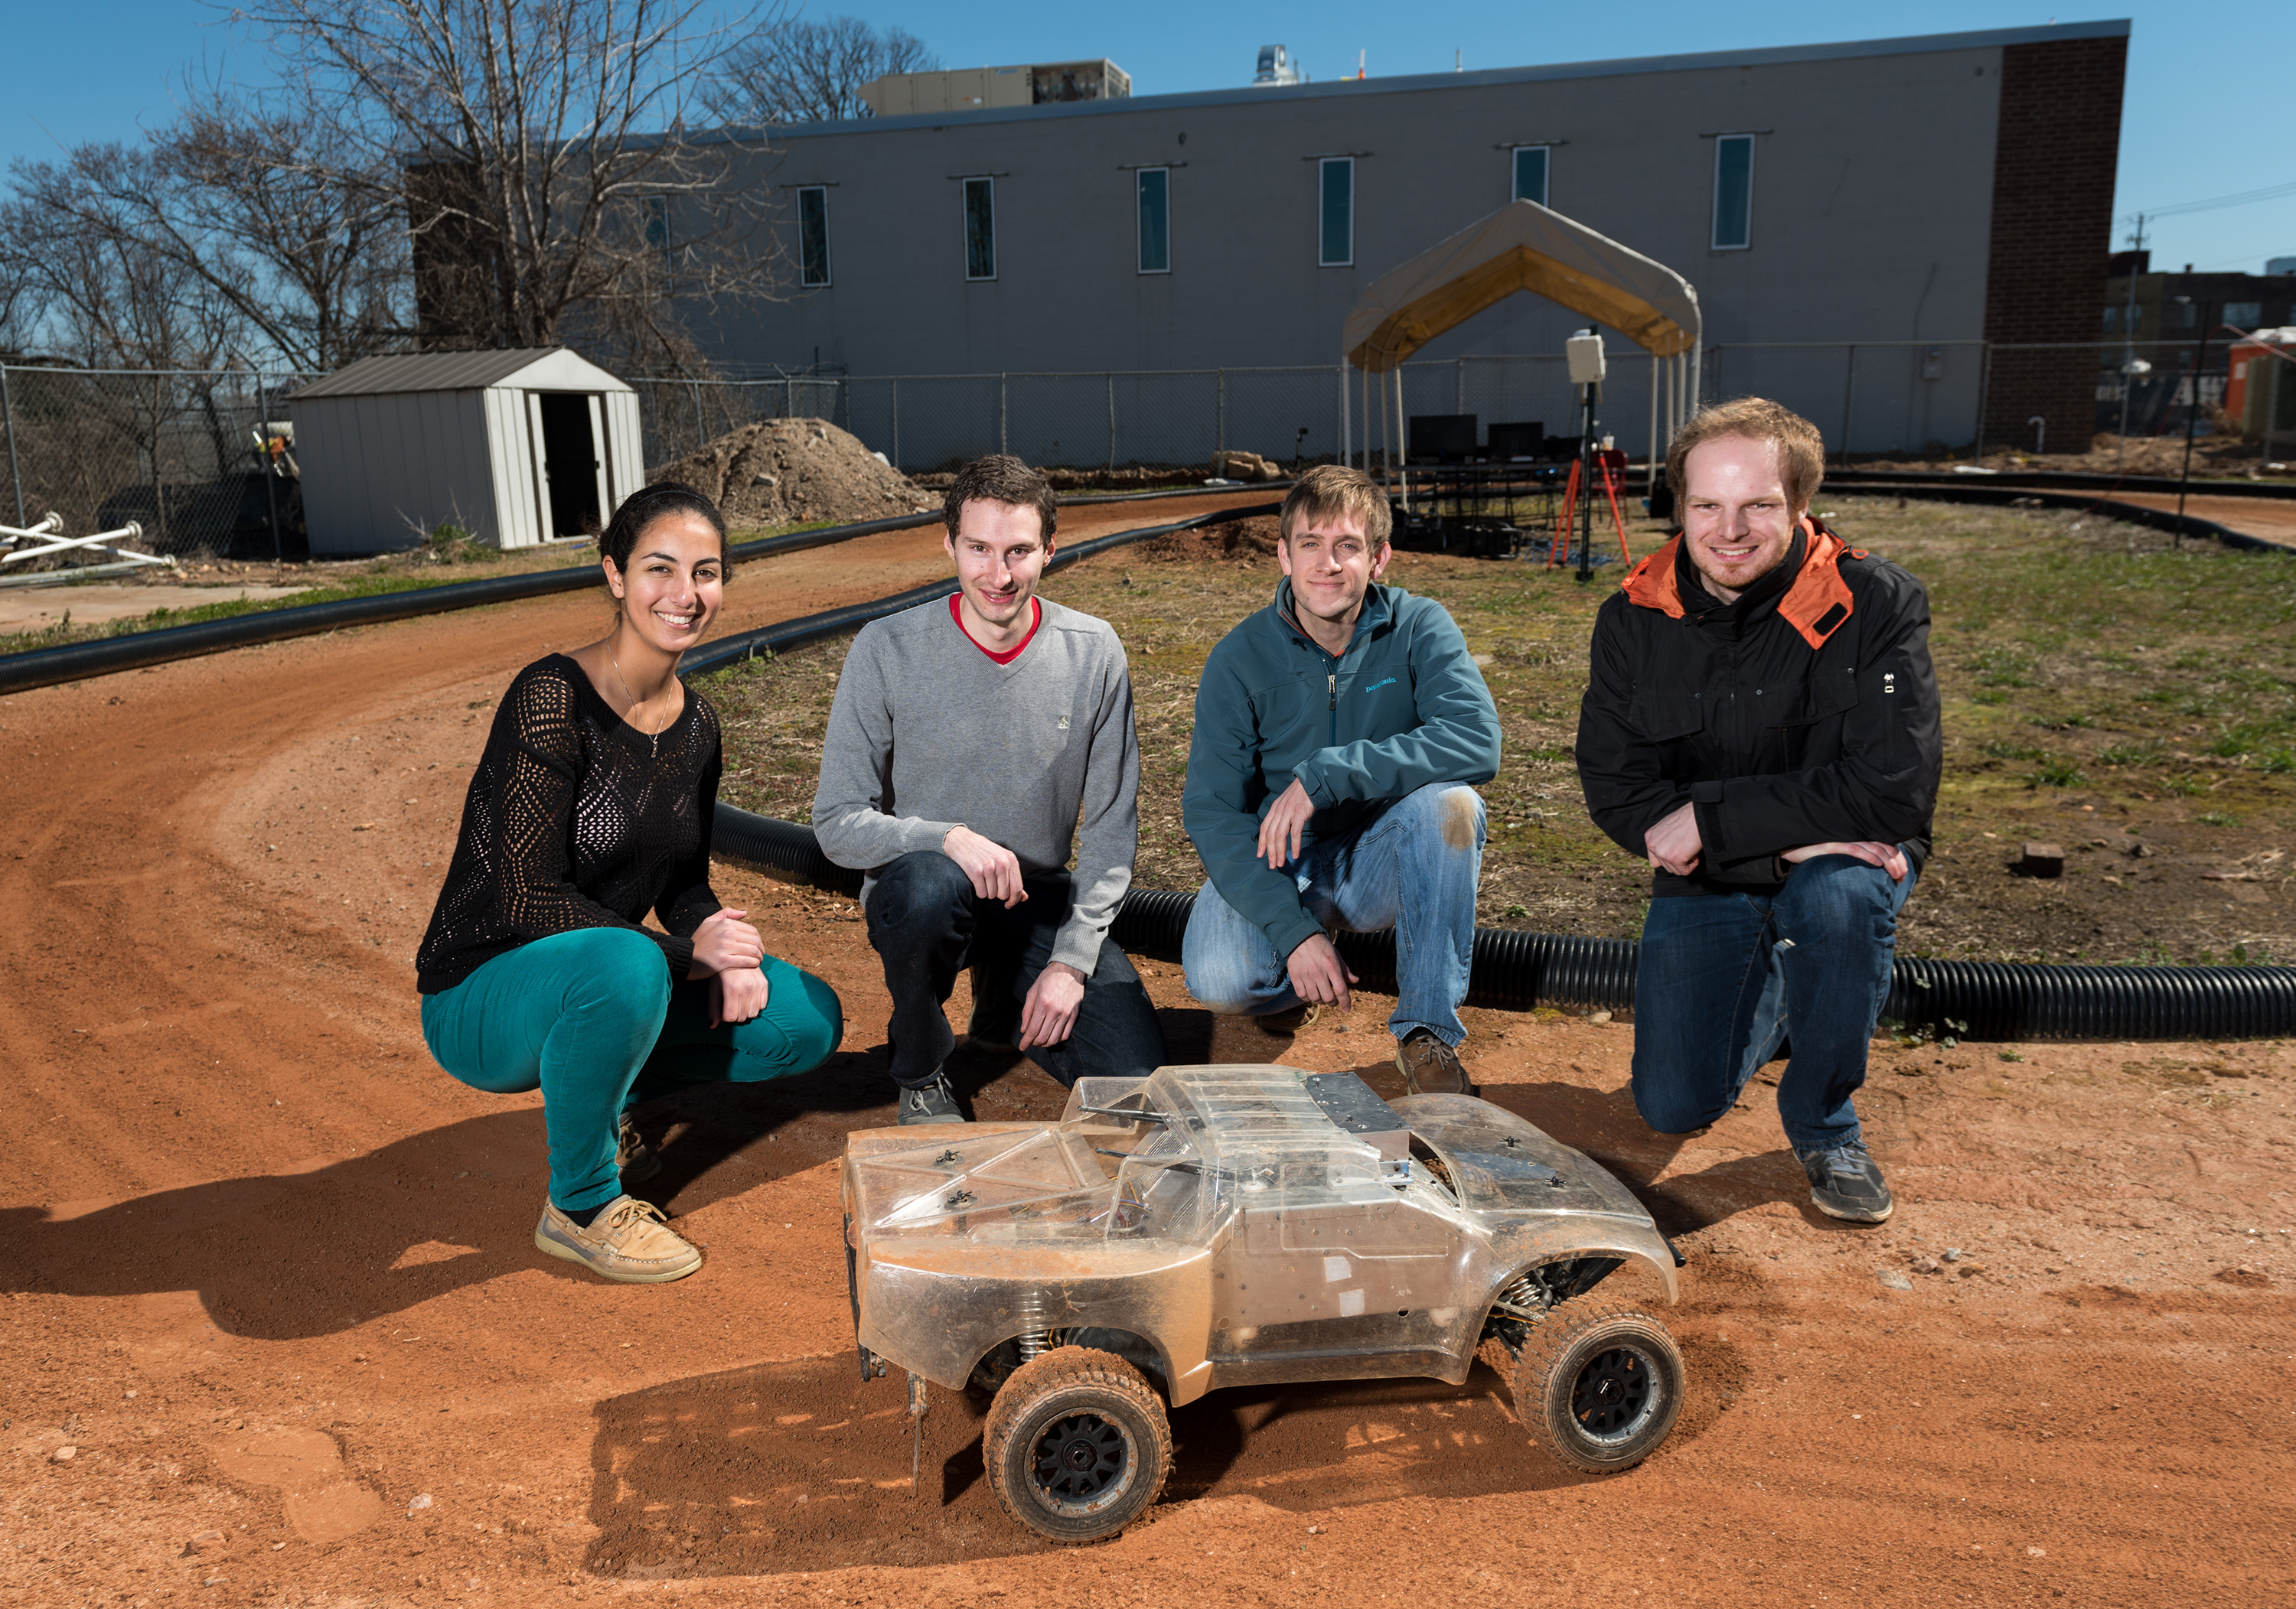 Georgia Tech researchers are using an electric-powered autonomous vehicle to help driverless vehicles maintain control at the edge of their handling limits. Shown (l-r) are Georgia Tech students Sarah Selim, Brian Goldfain, Paul Drews, Grady Williams. (Credit: rob Felt)